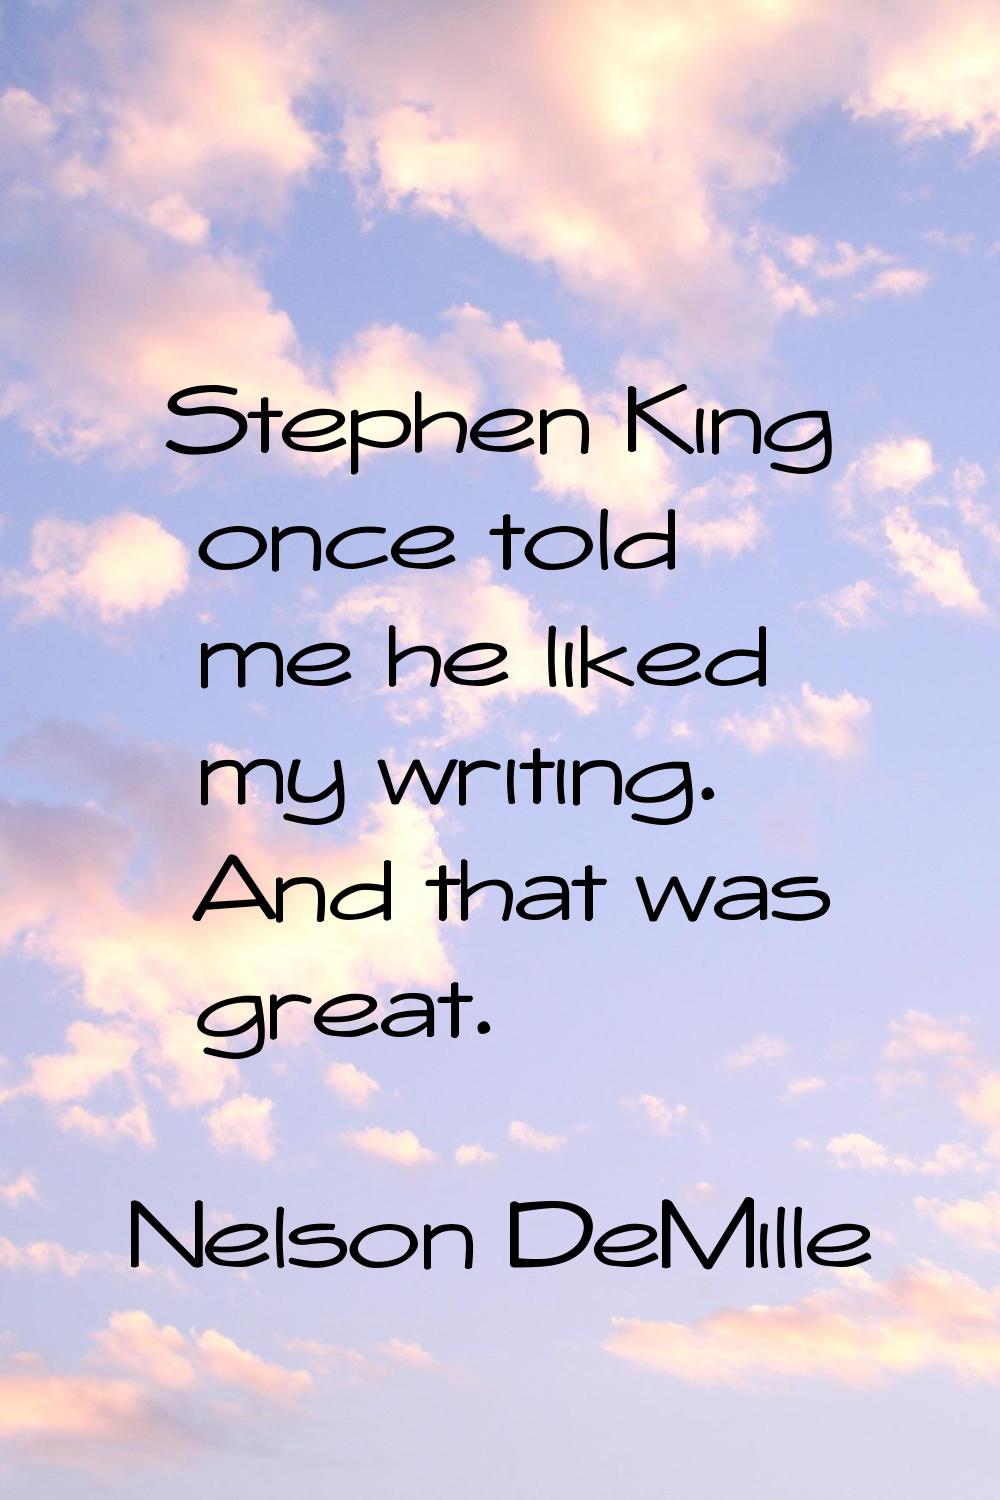 Stephen King once told me he liked my writing. And that was great.